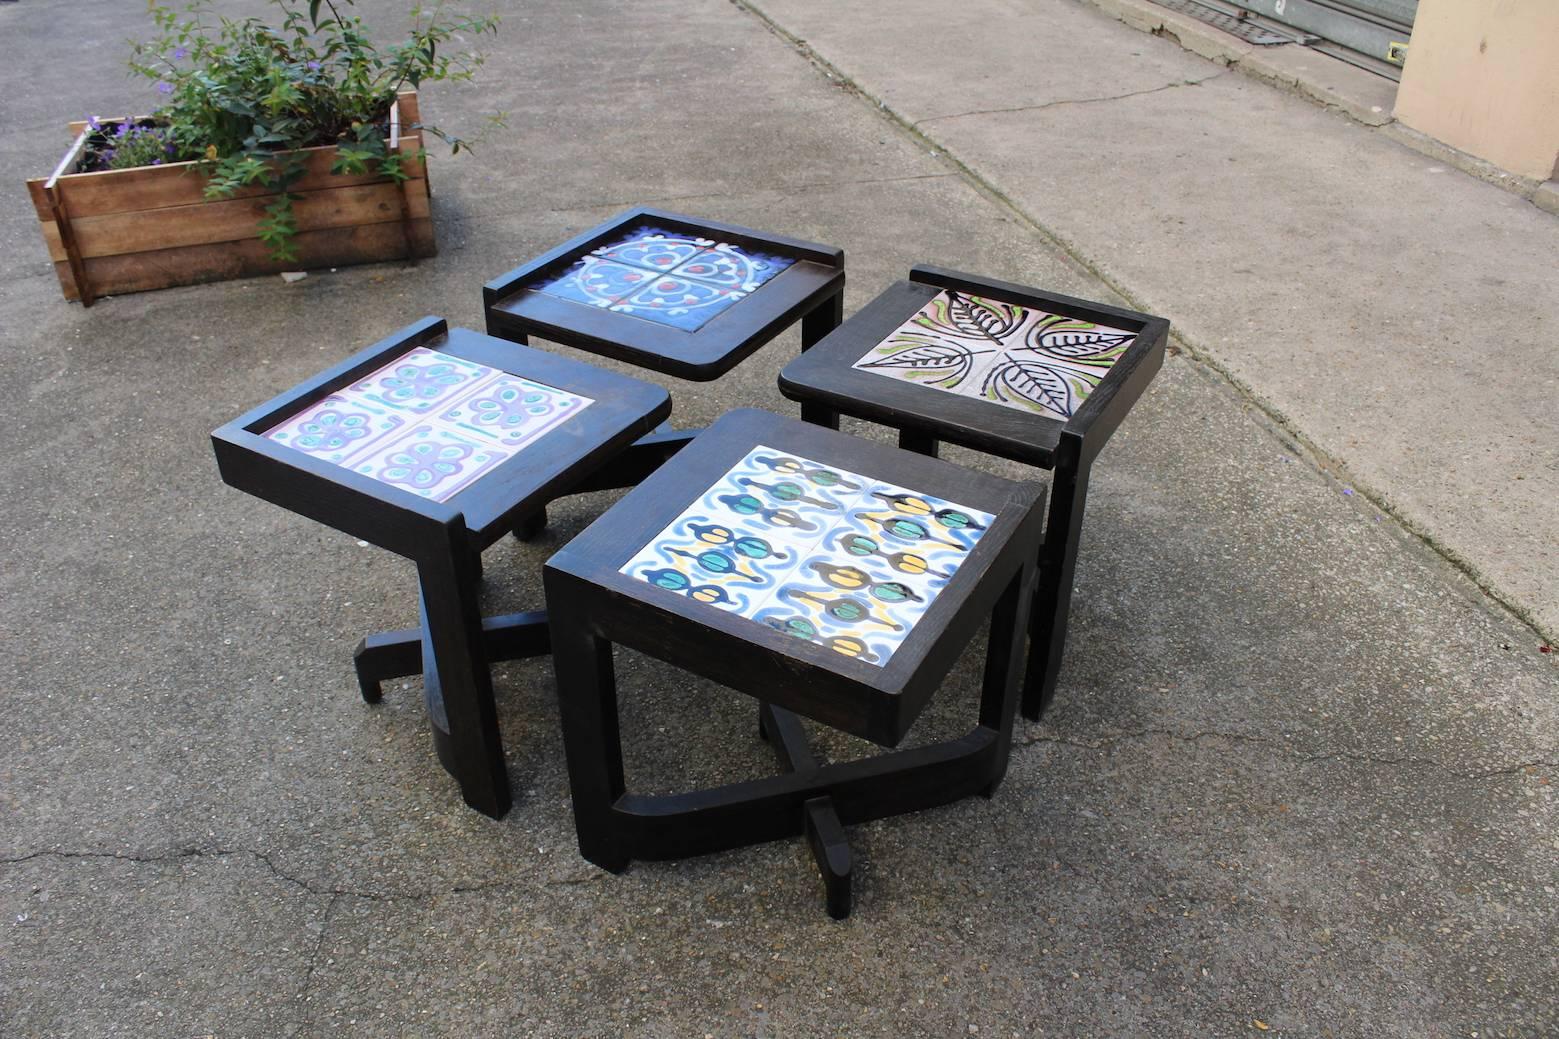 Beautiful set of four end tables by Robert Guillerme (1913-1990) and Jacques Chambron (1914-2001)
(can form a single cocktail table)
Ceramics by Boleslaw Danikowski (1928-1979)
In excellent condition
Total dimension: 80 x 80cm.